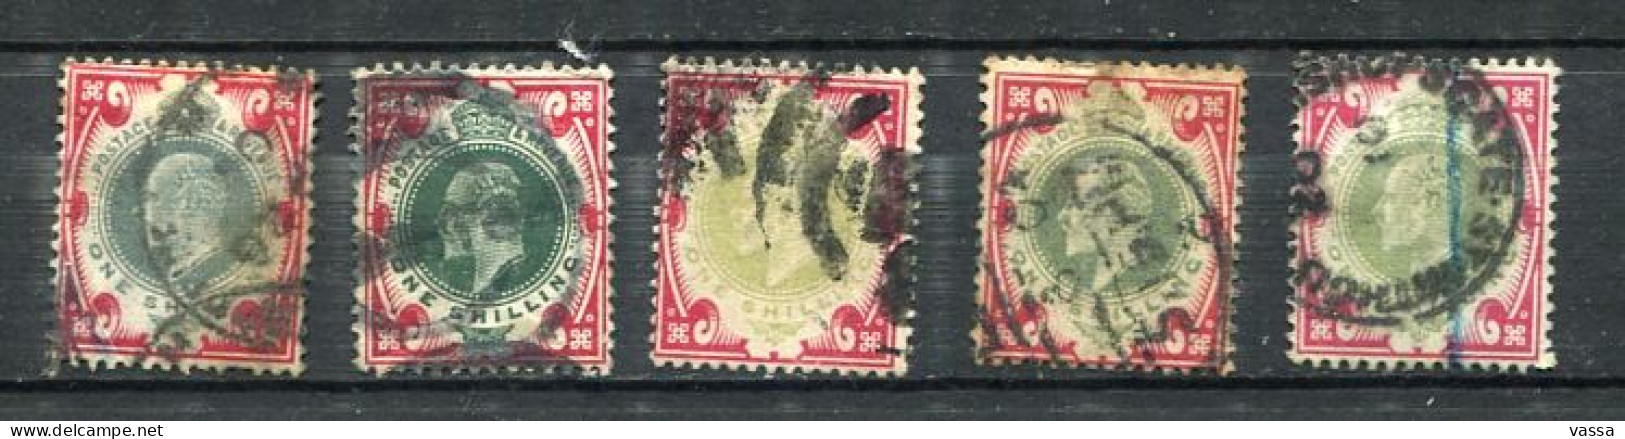 . 1902 / 05 King Edward VII 1 Sh Red / Green Lot 5 Shades Michel 114 A YT 117 - Used Stamps